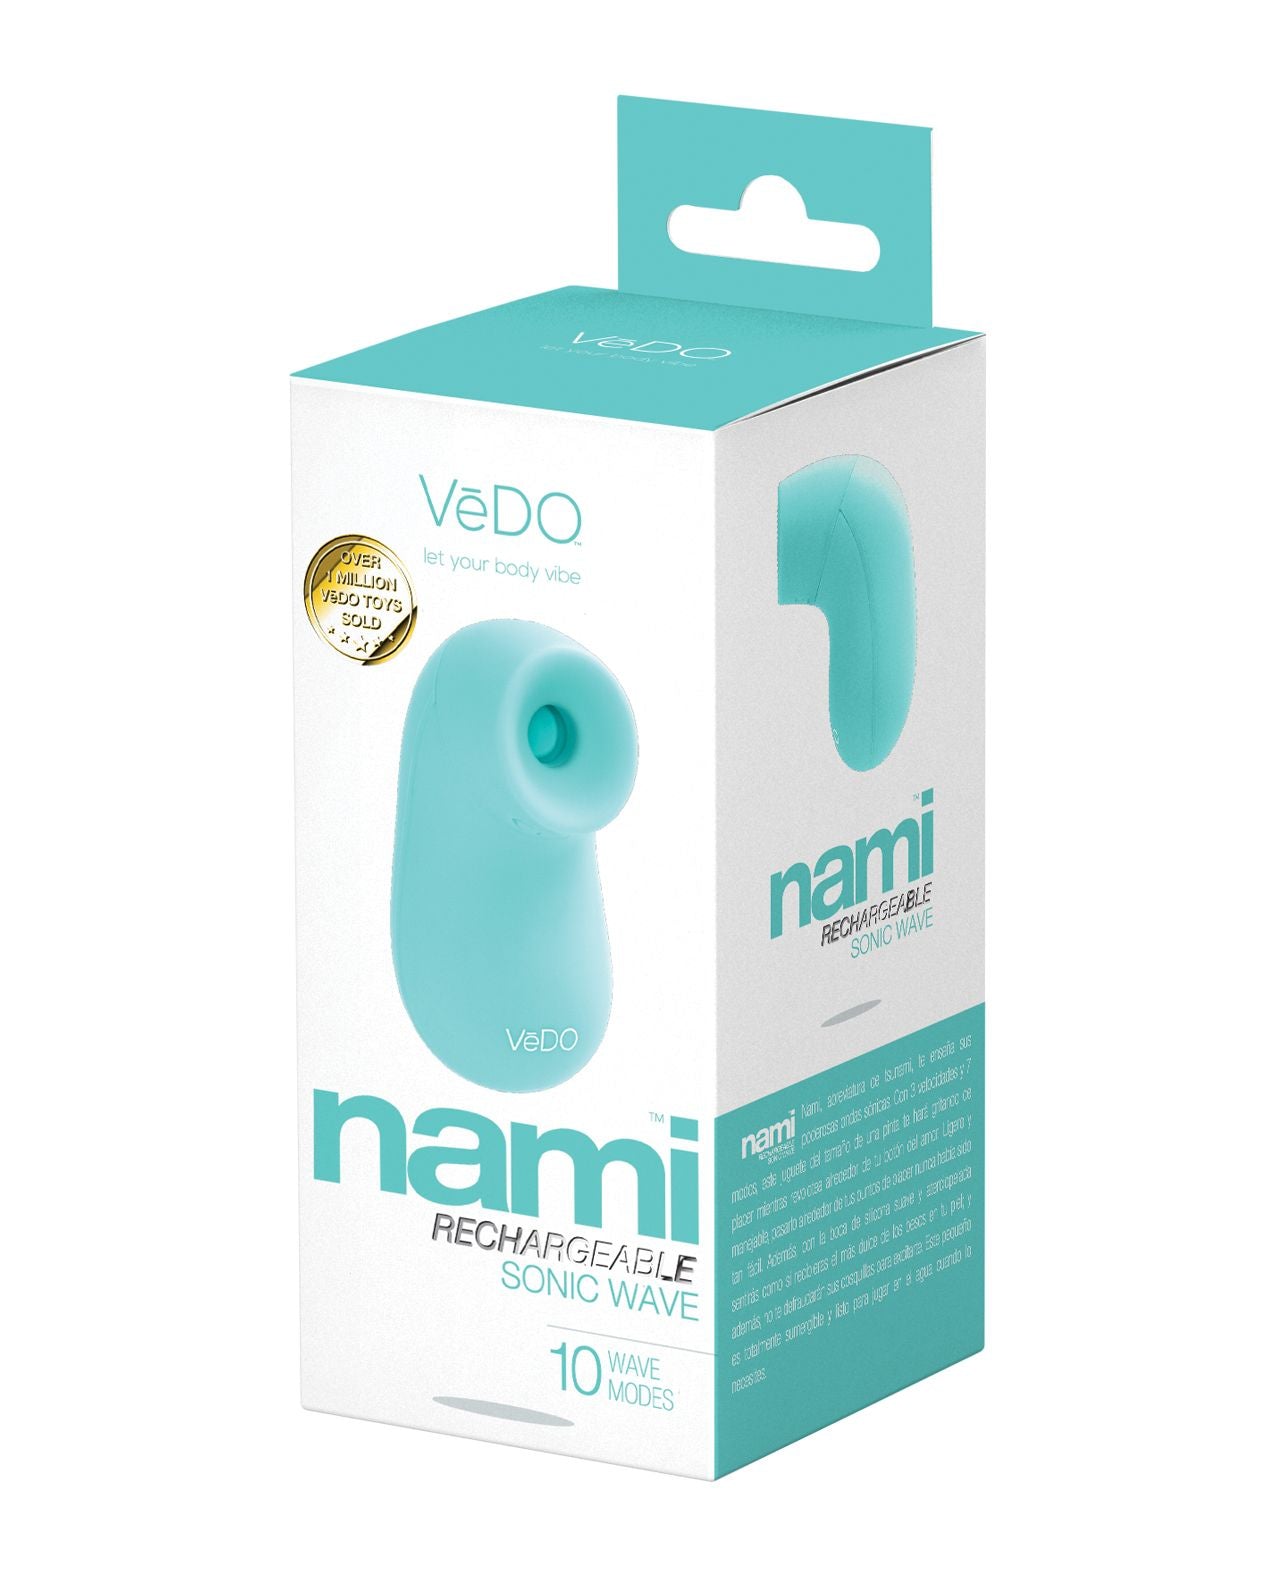 VeDO Nami Sonic Wave Vibe in its box (turquoise).